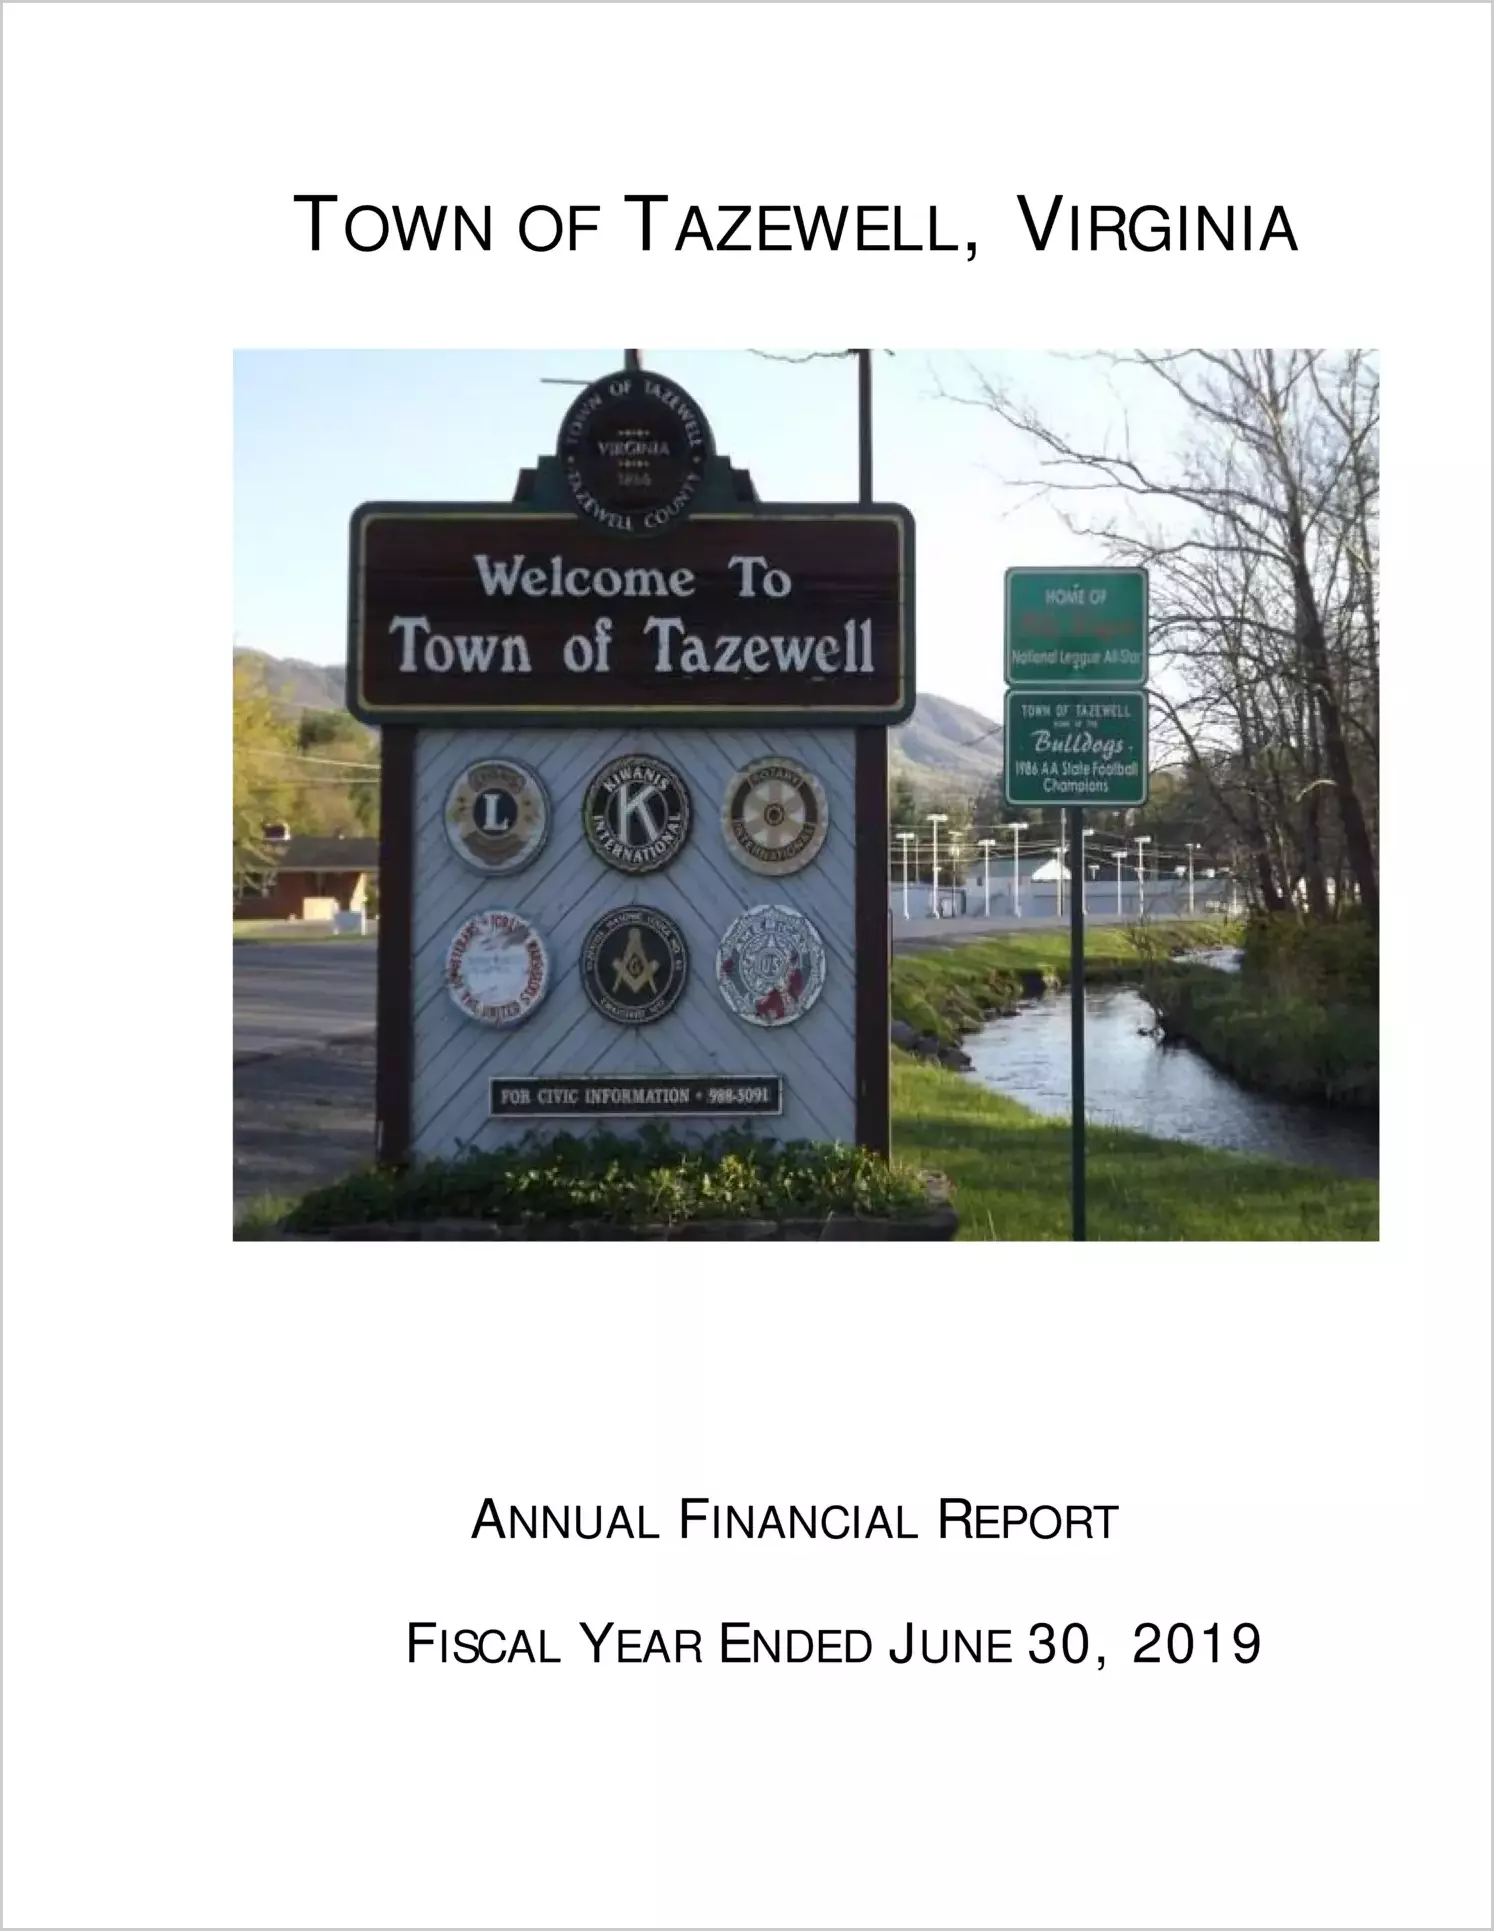 2019 Annual Financial Report for Town of Tazewell